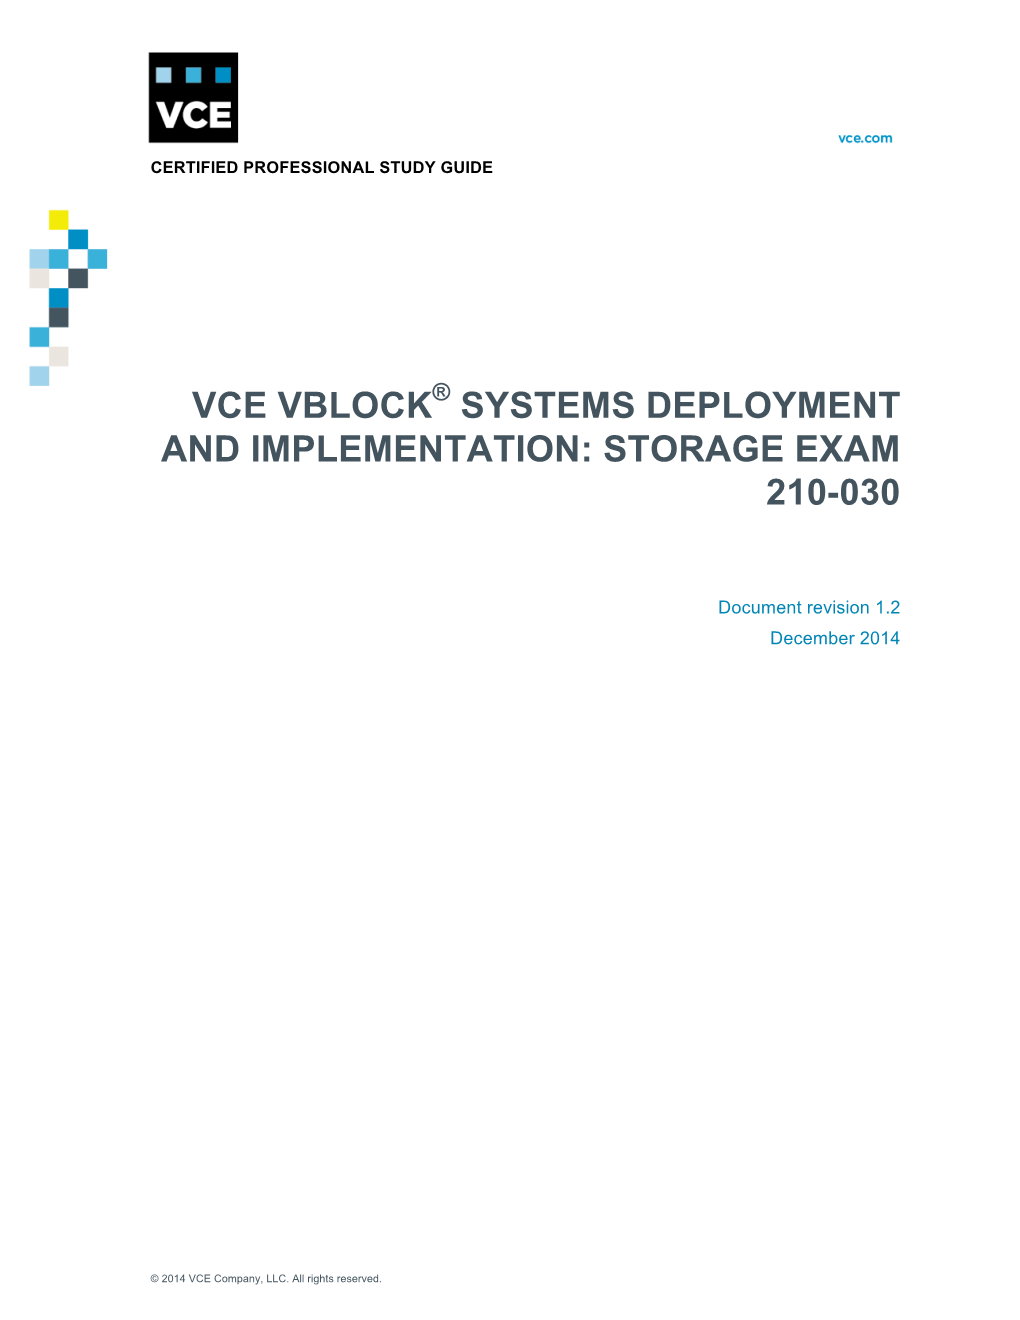 Vce Vblock® Systems Deployment and Implementation: Storage Exam 210-030